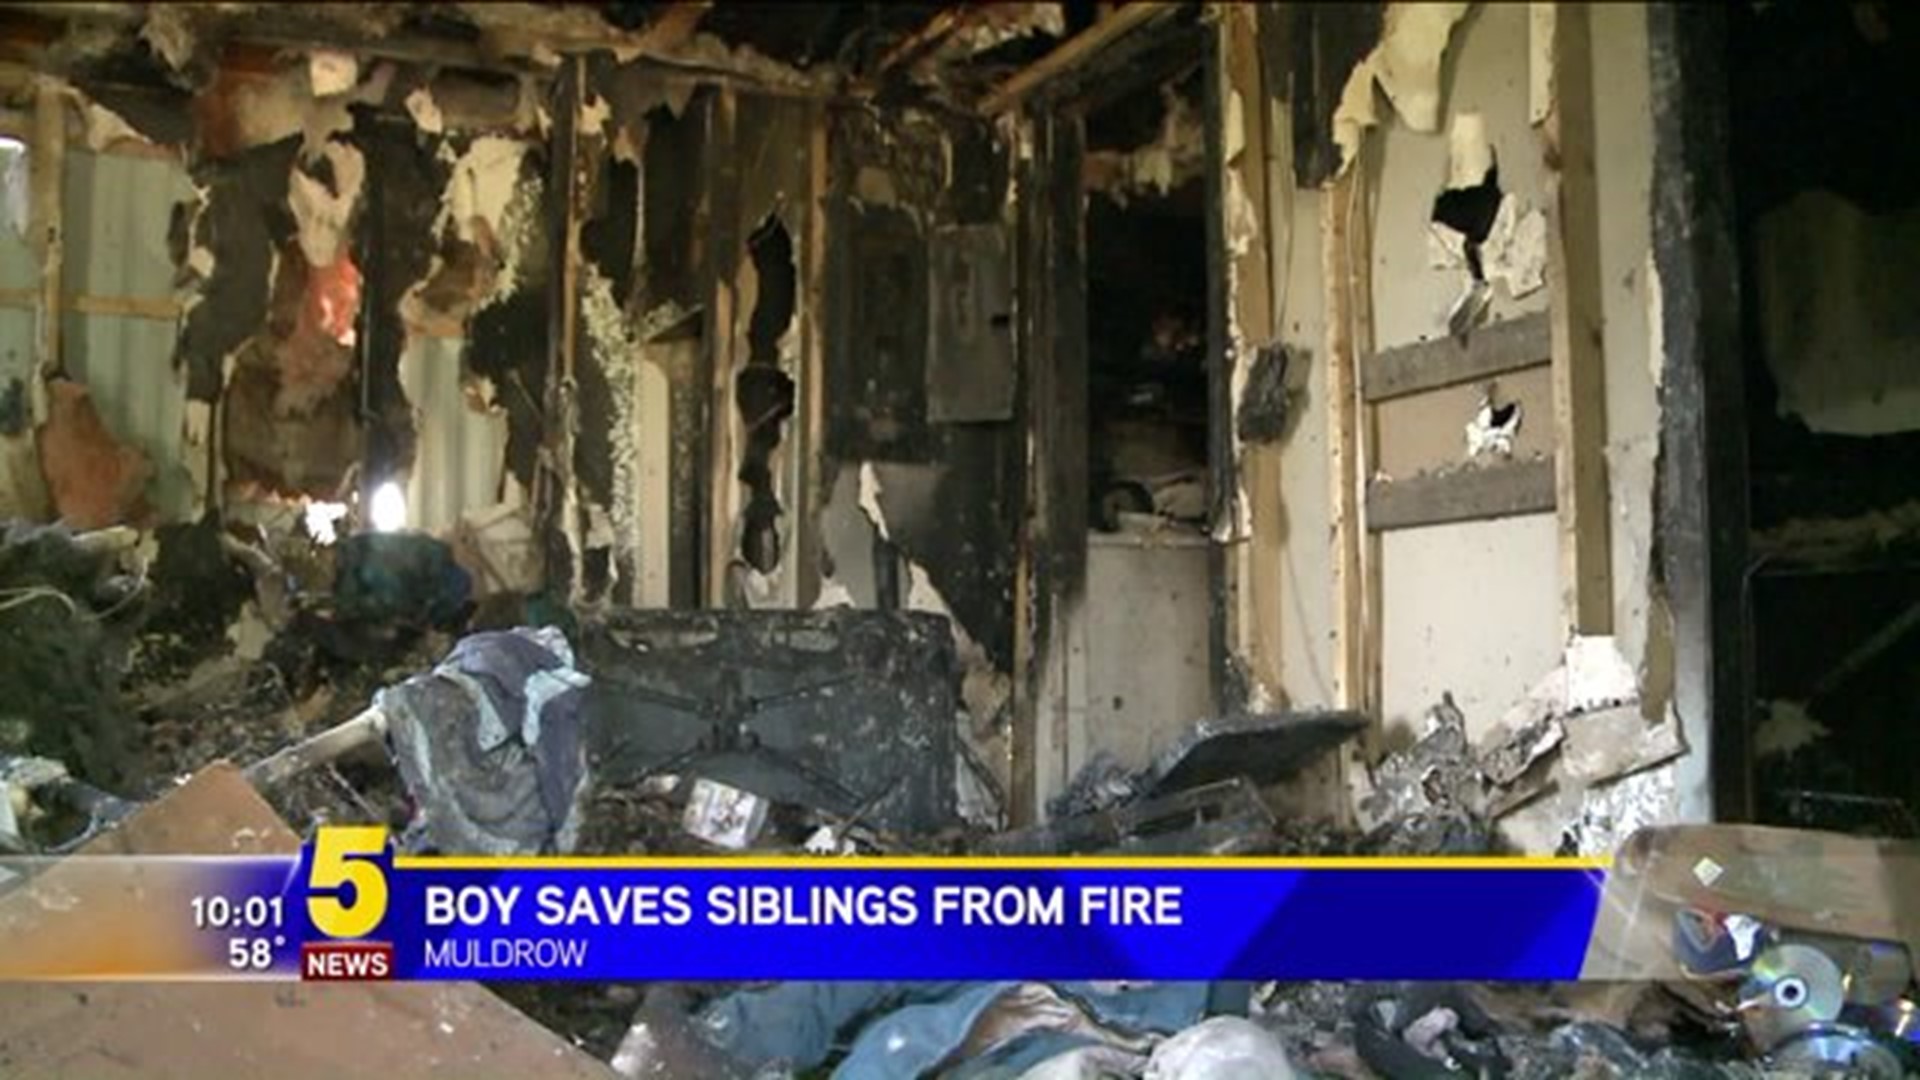 Boy Saves Siblings From Fire